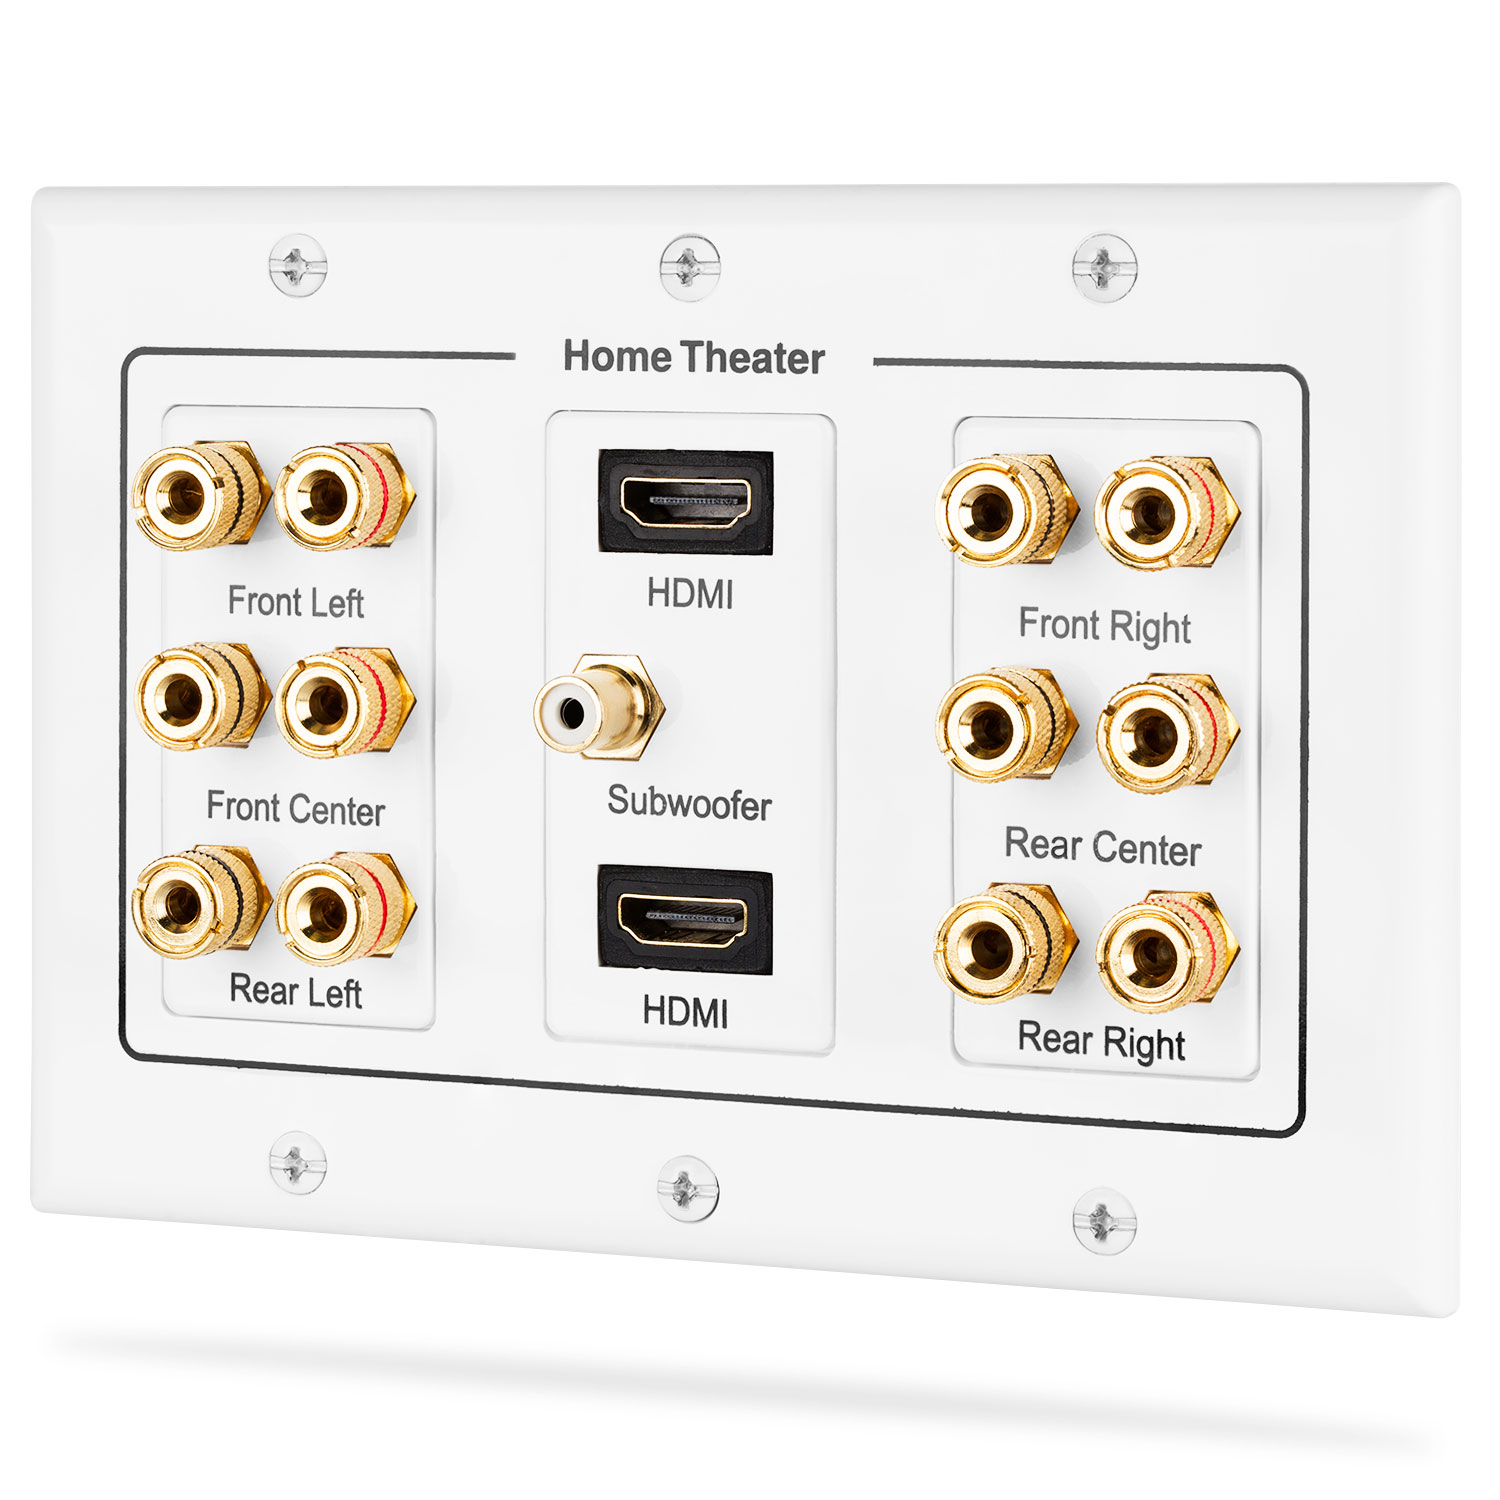 Fosmon HD8005 [3-Gang 6.1 Surround Distribution] Home Theater Copper Banana Binding Post Coupler Type Wall Plate for 6 Speakers, 1 RCA Jack for Subwoofer & 2 HDMI Ports - image 1 of 7